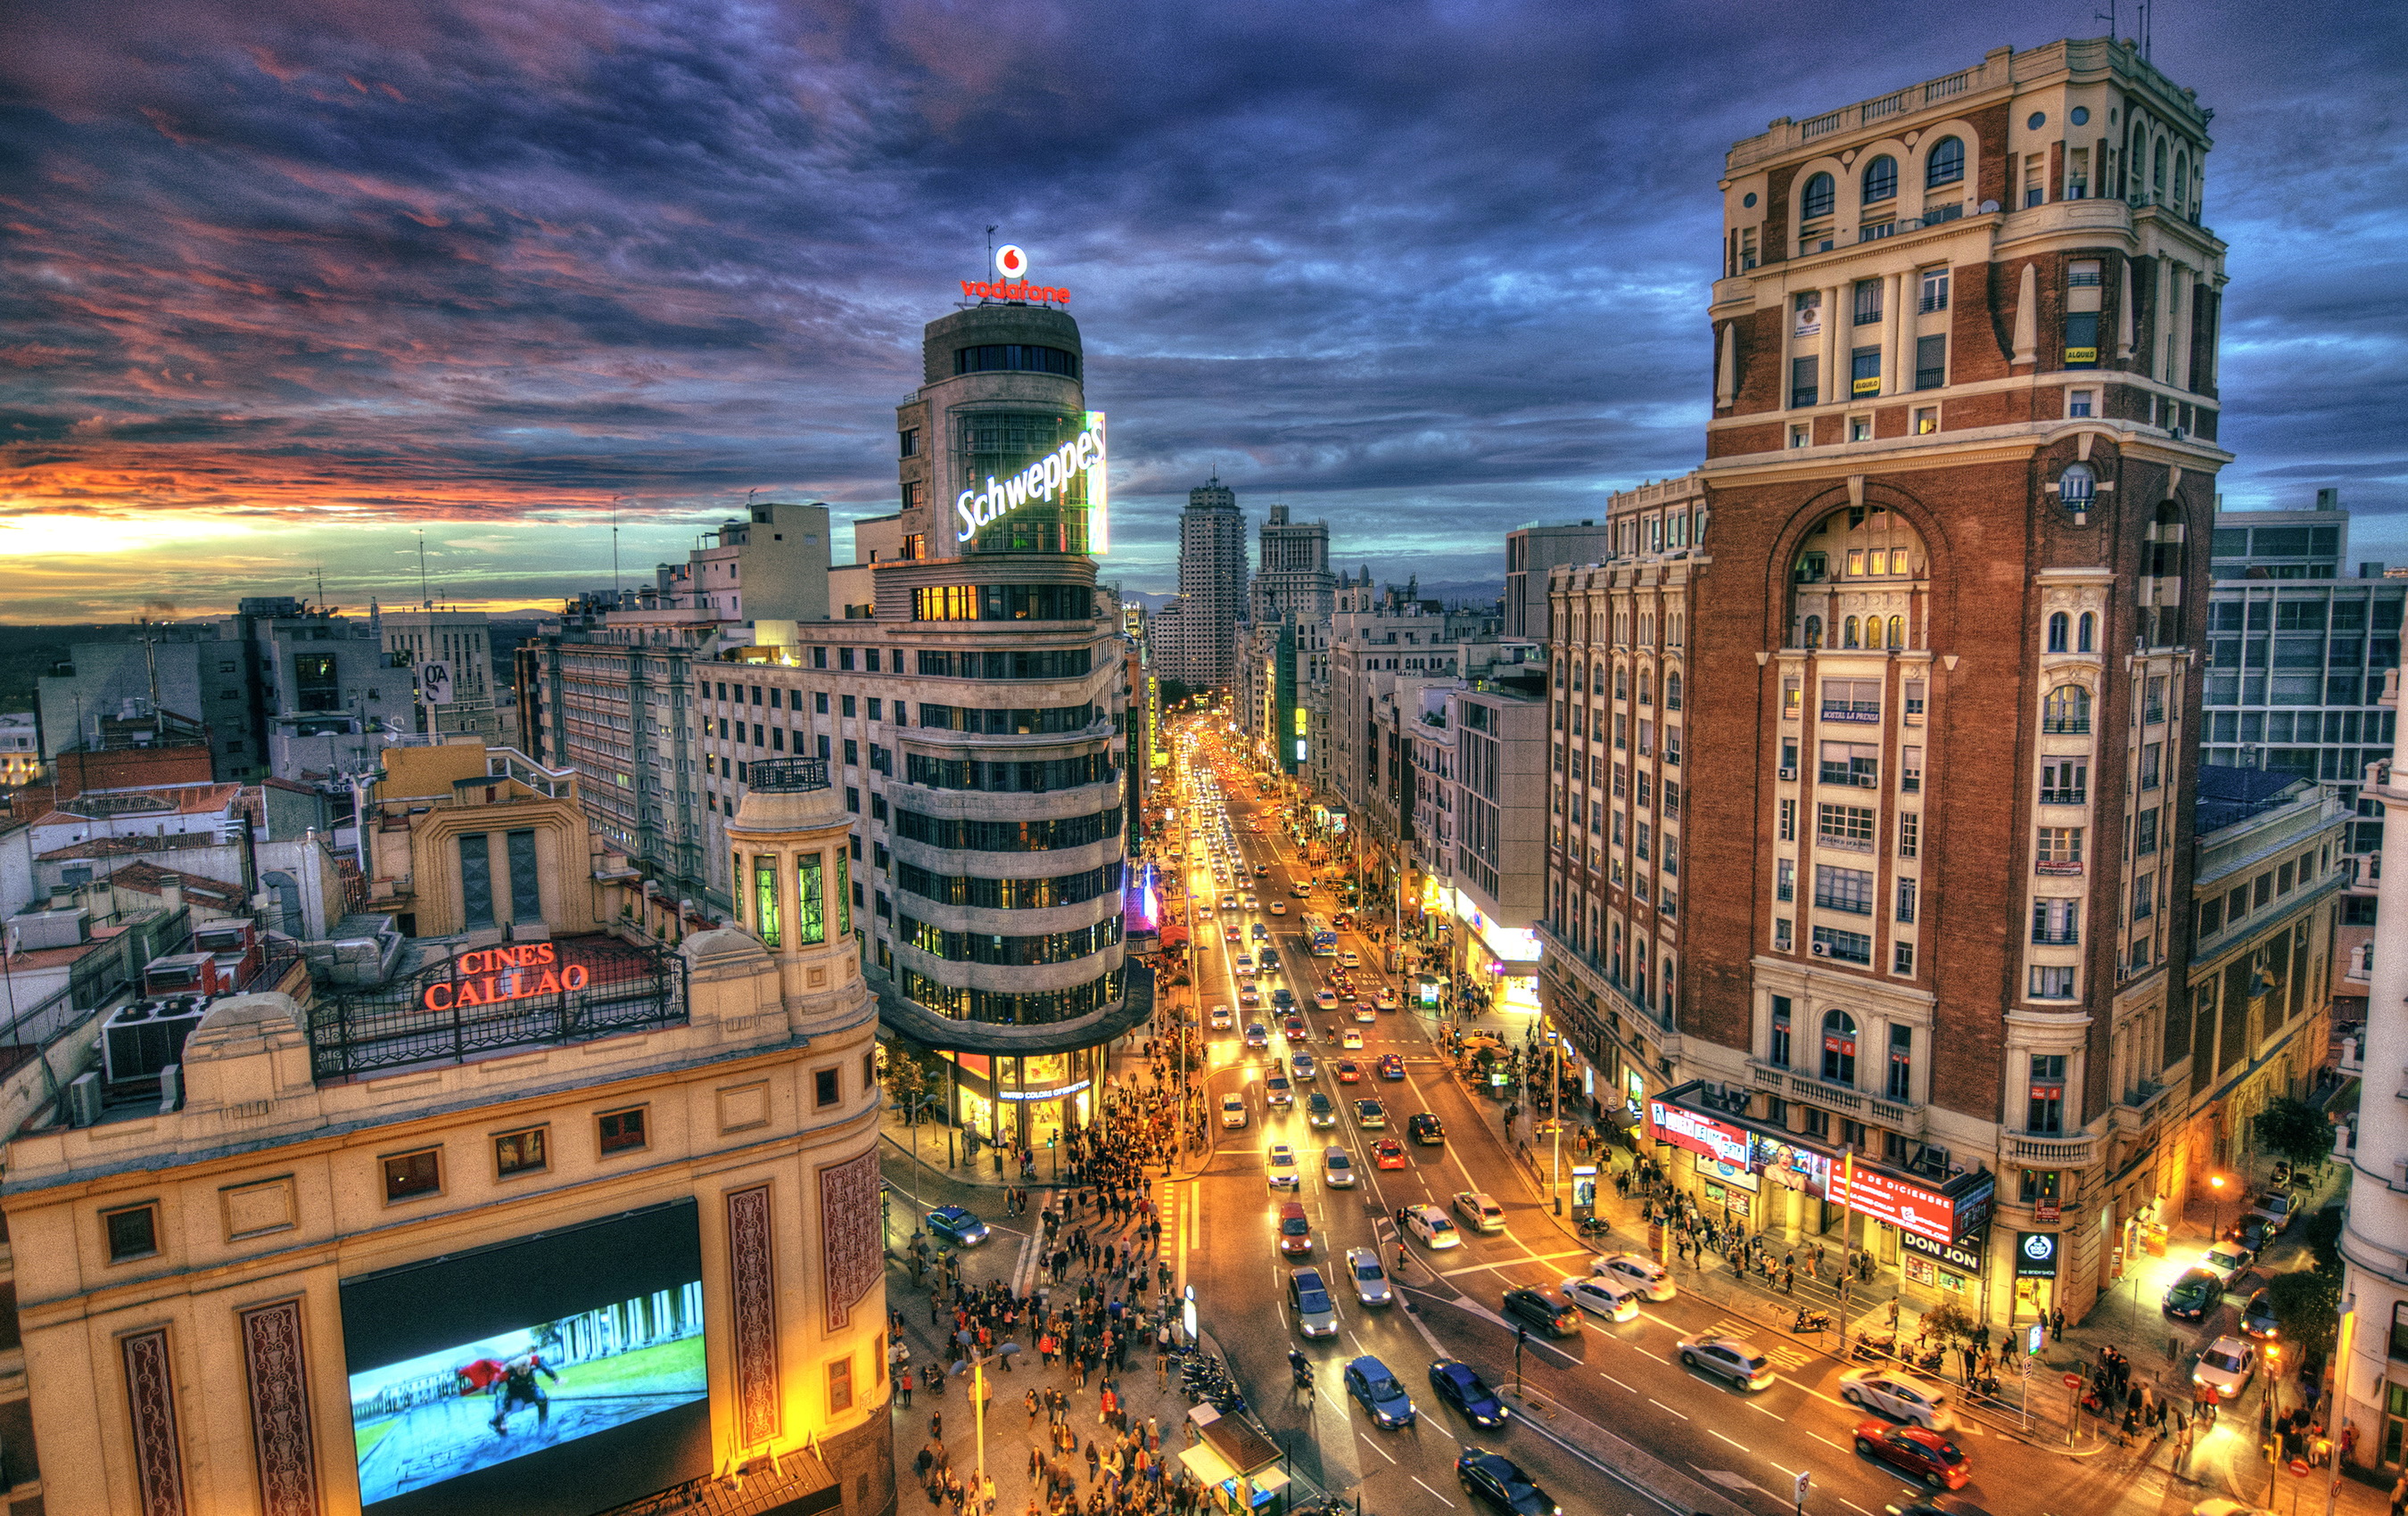 Hd 1080p Images evening, madrid, spain, city